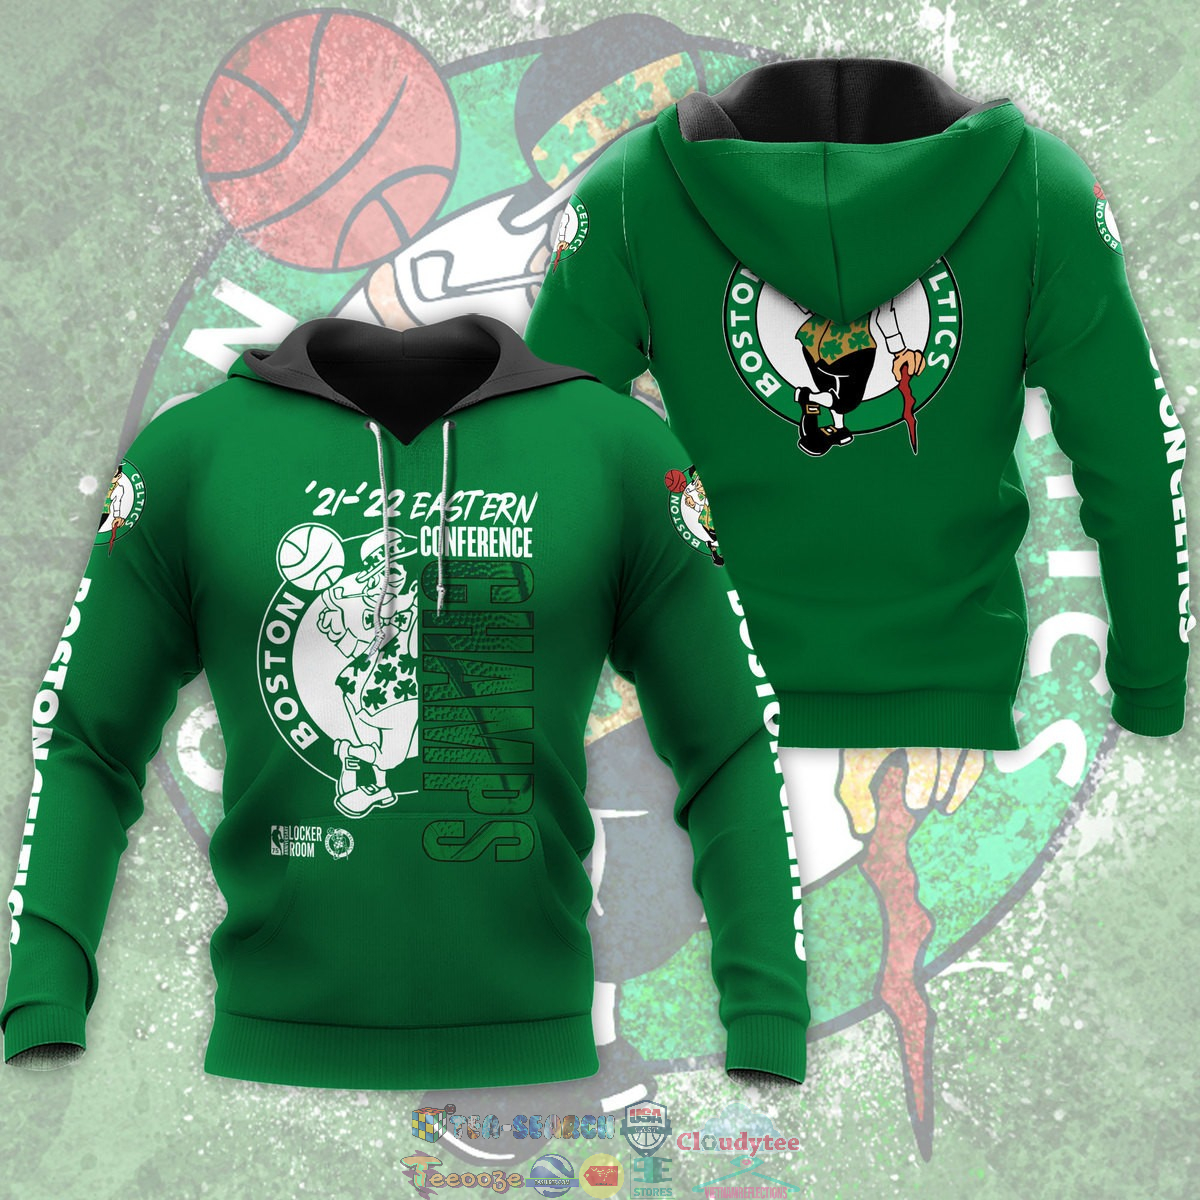 21-22 Eastern Conferrence Champs Boston Celtics Green 3D hoodie and t-shirt – Saleoff